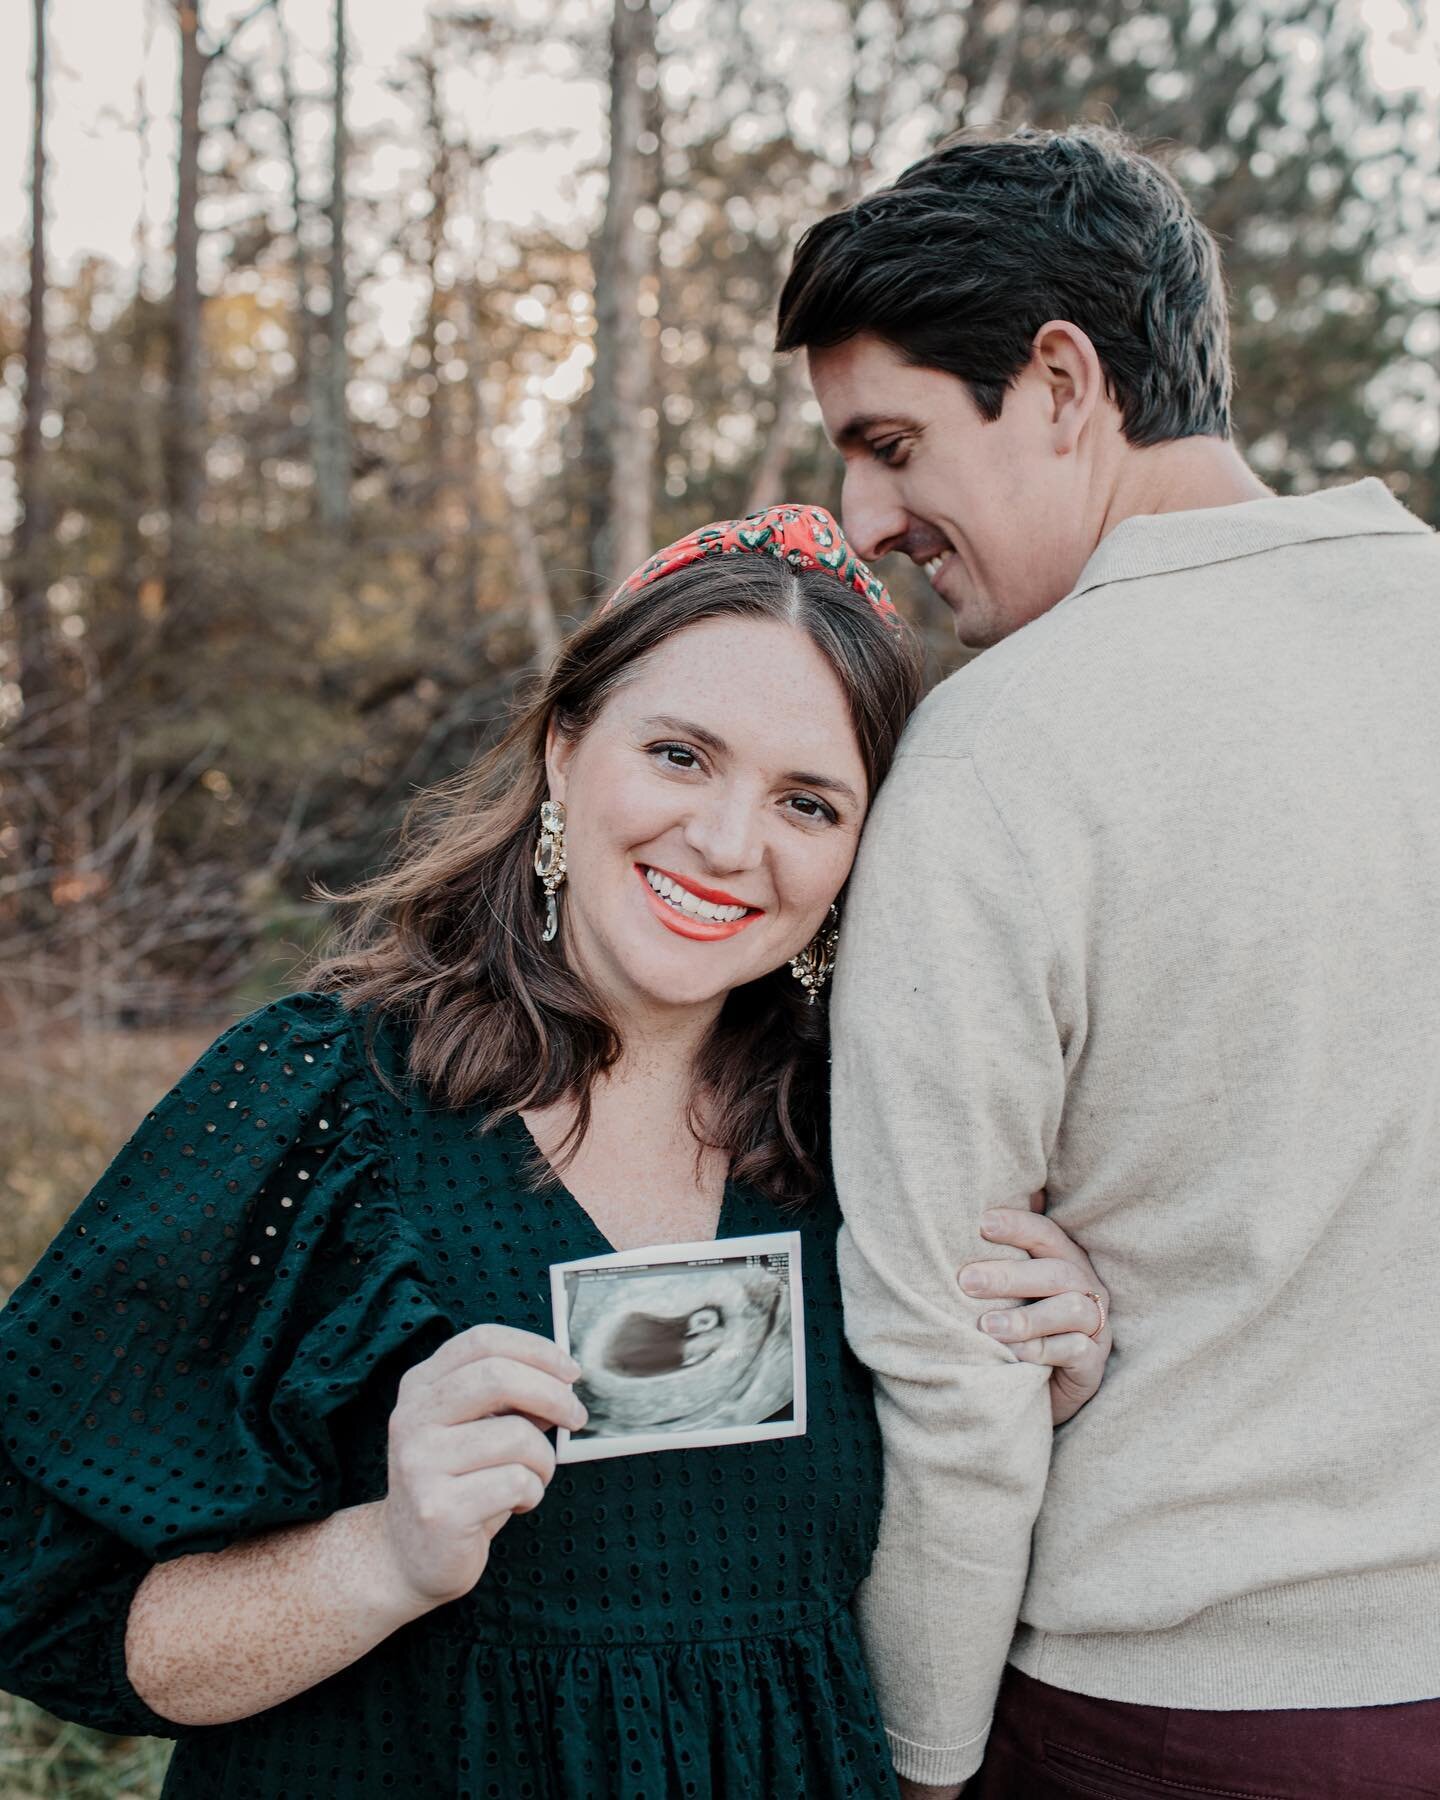 Merry Christmas! The greatest gift we could ask for is arriving in May 2023! Drew and I are so excited to meet baby BOY Miller in just a few short months. He is already so so loved. ❤️❤️ Thank you @lauraagabaphoto for helping us announce this great n